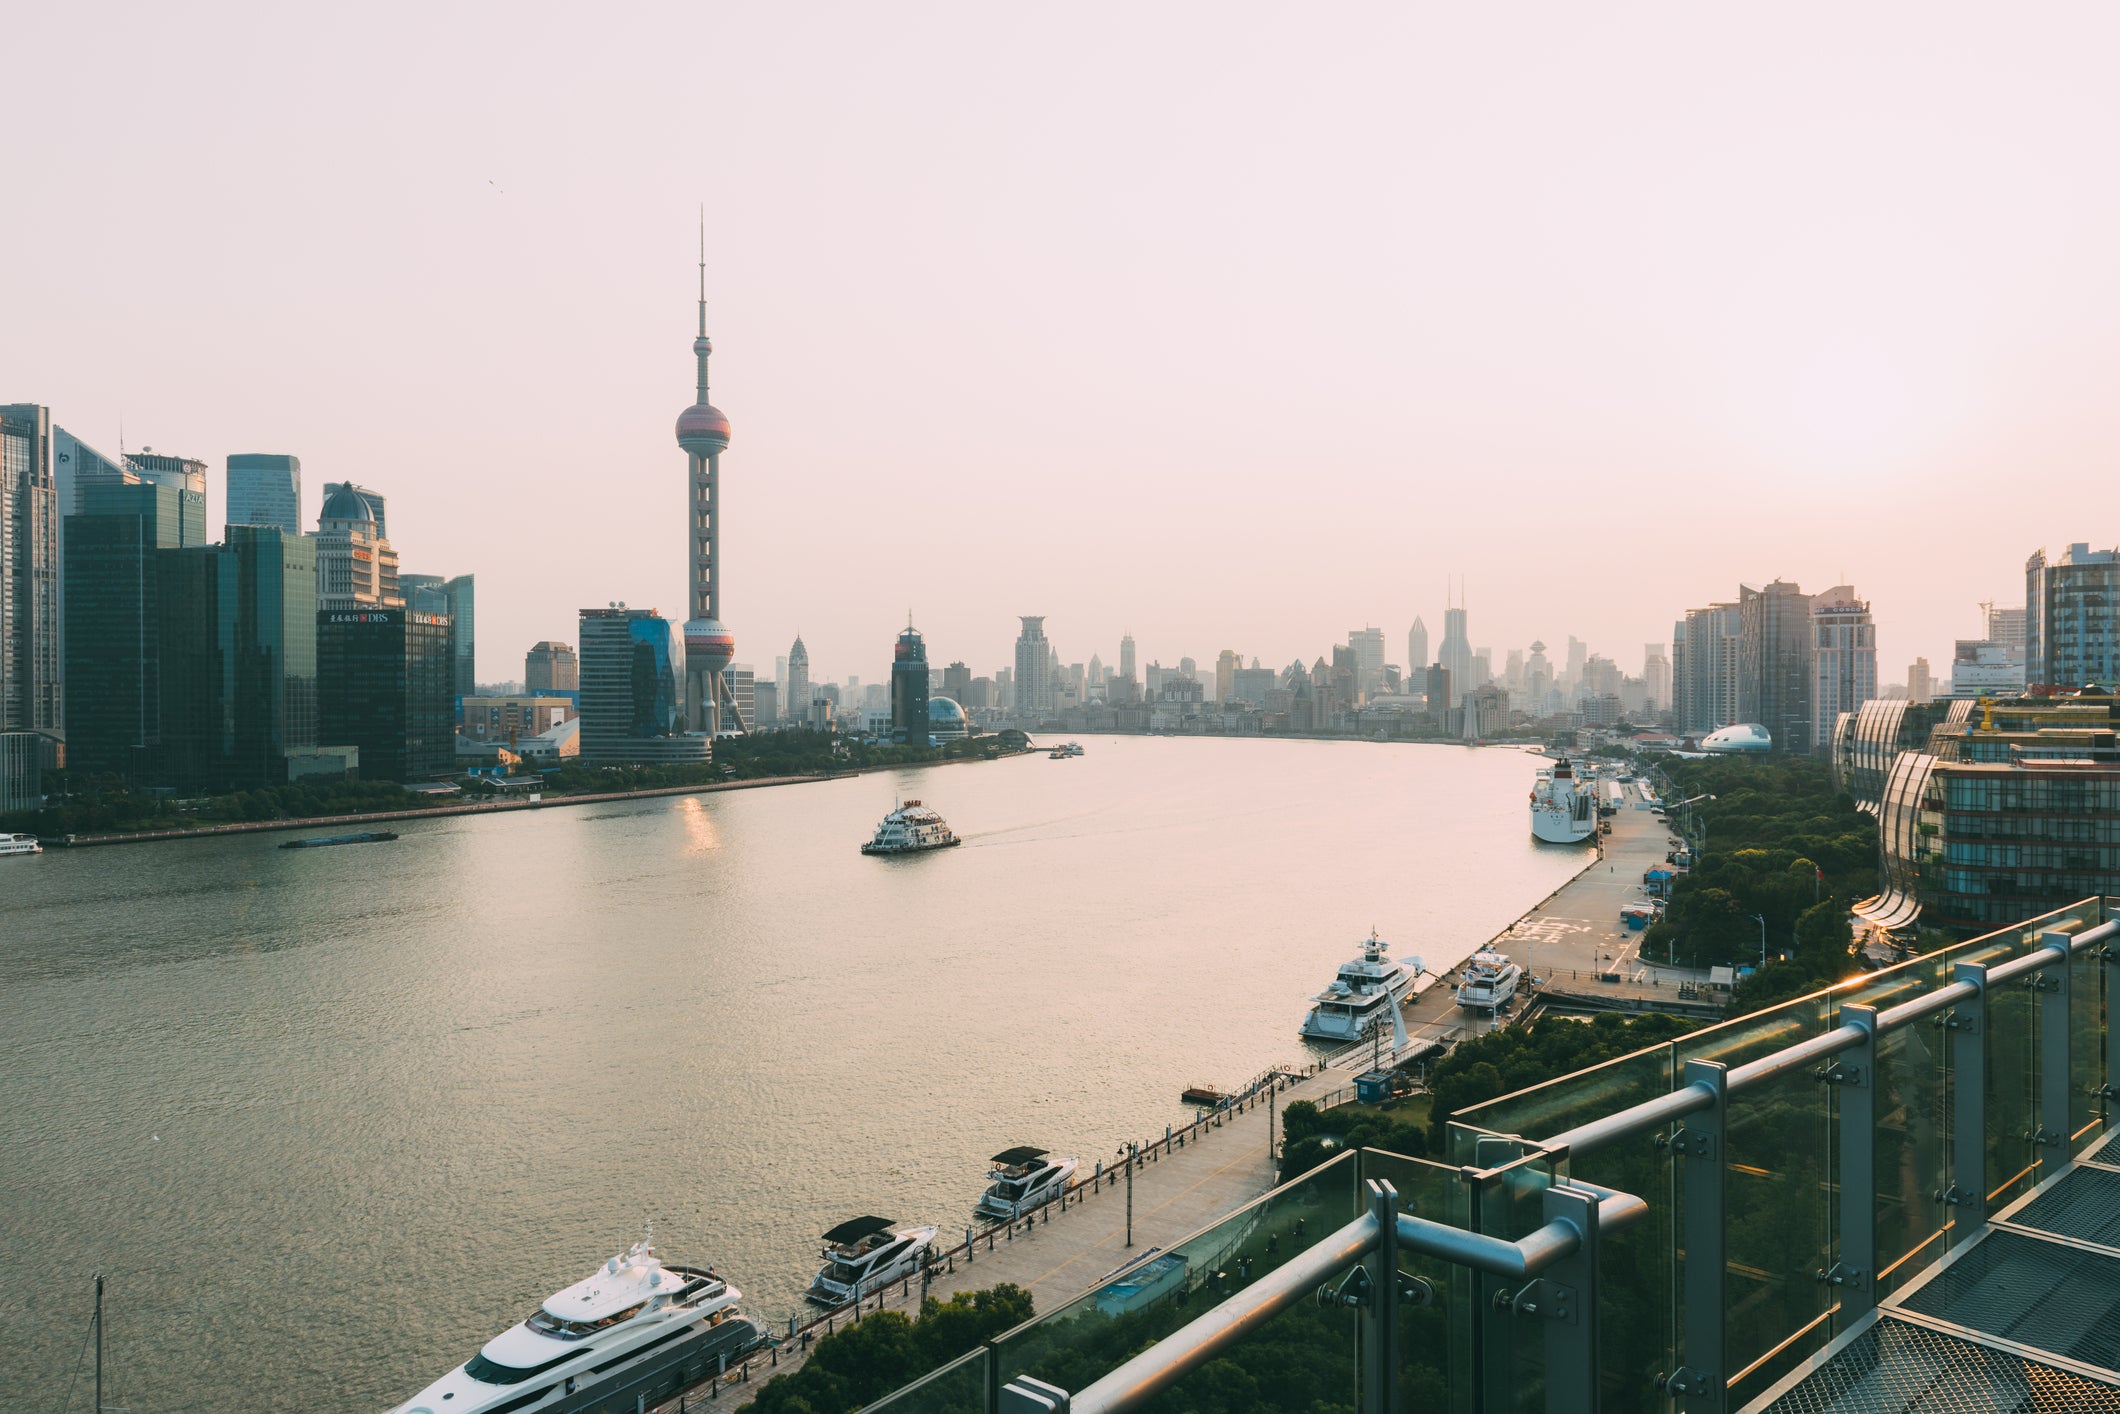 The cruise began in Shanghai, known for its dominating Pudong skyline